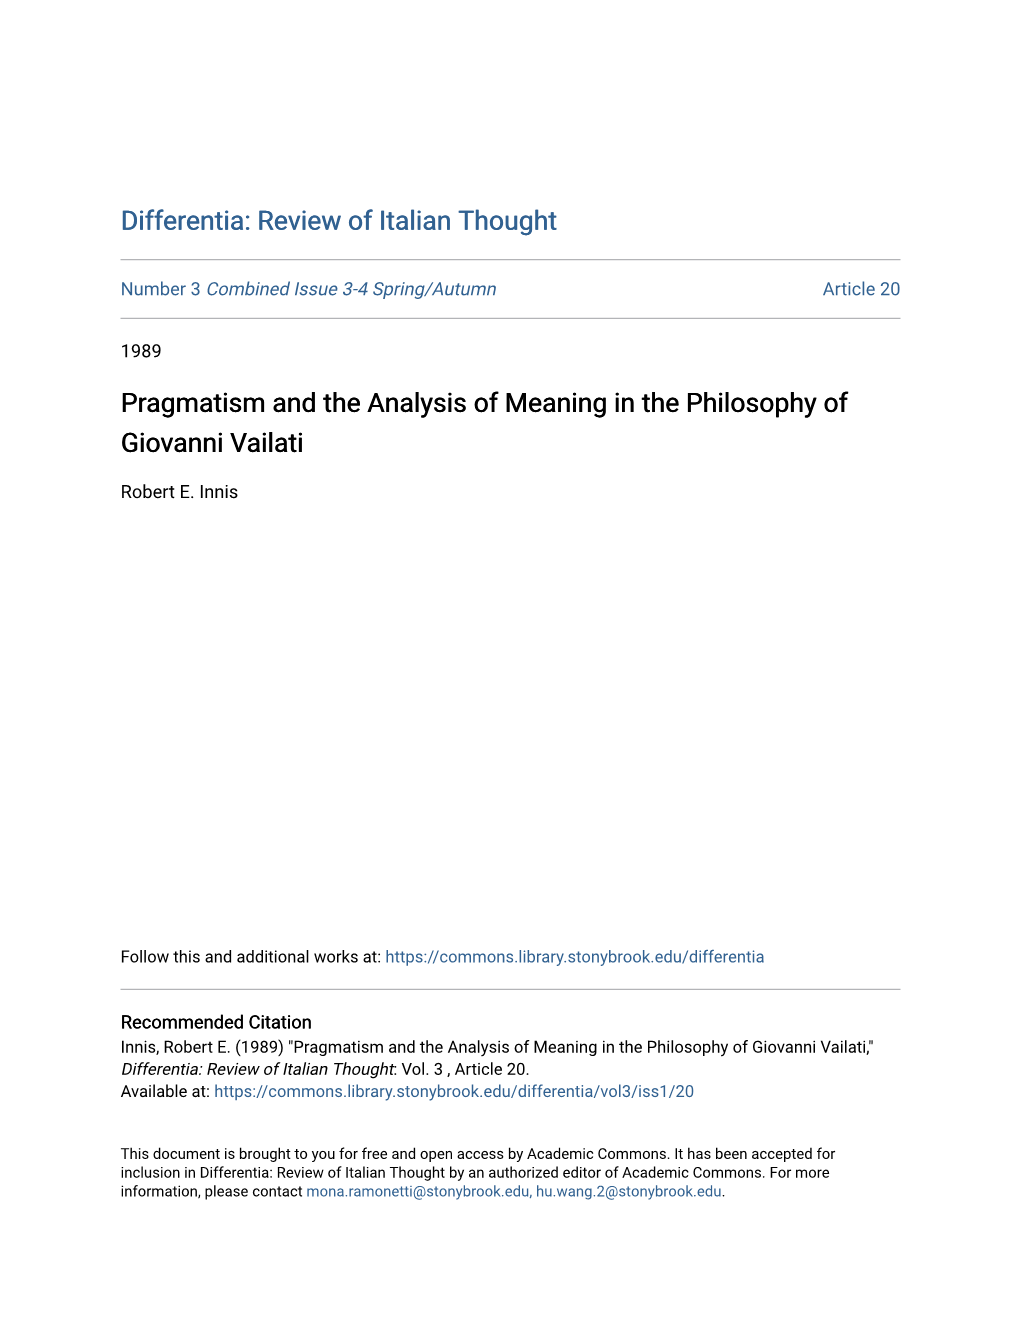 Pragmatism and the Analysis of Meaning in the Philosophy of Giovanni Vailati